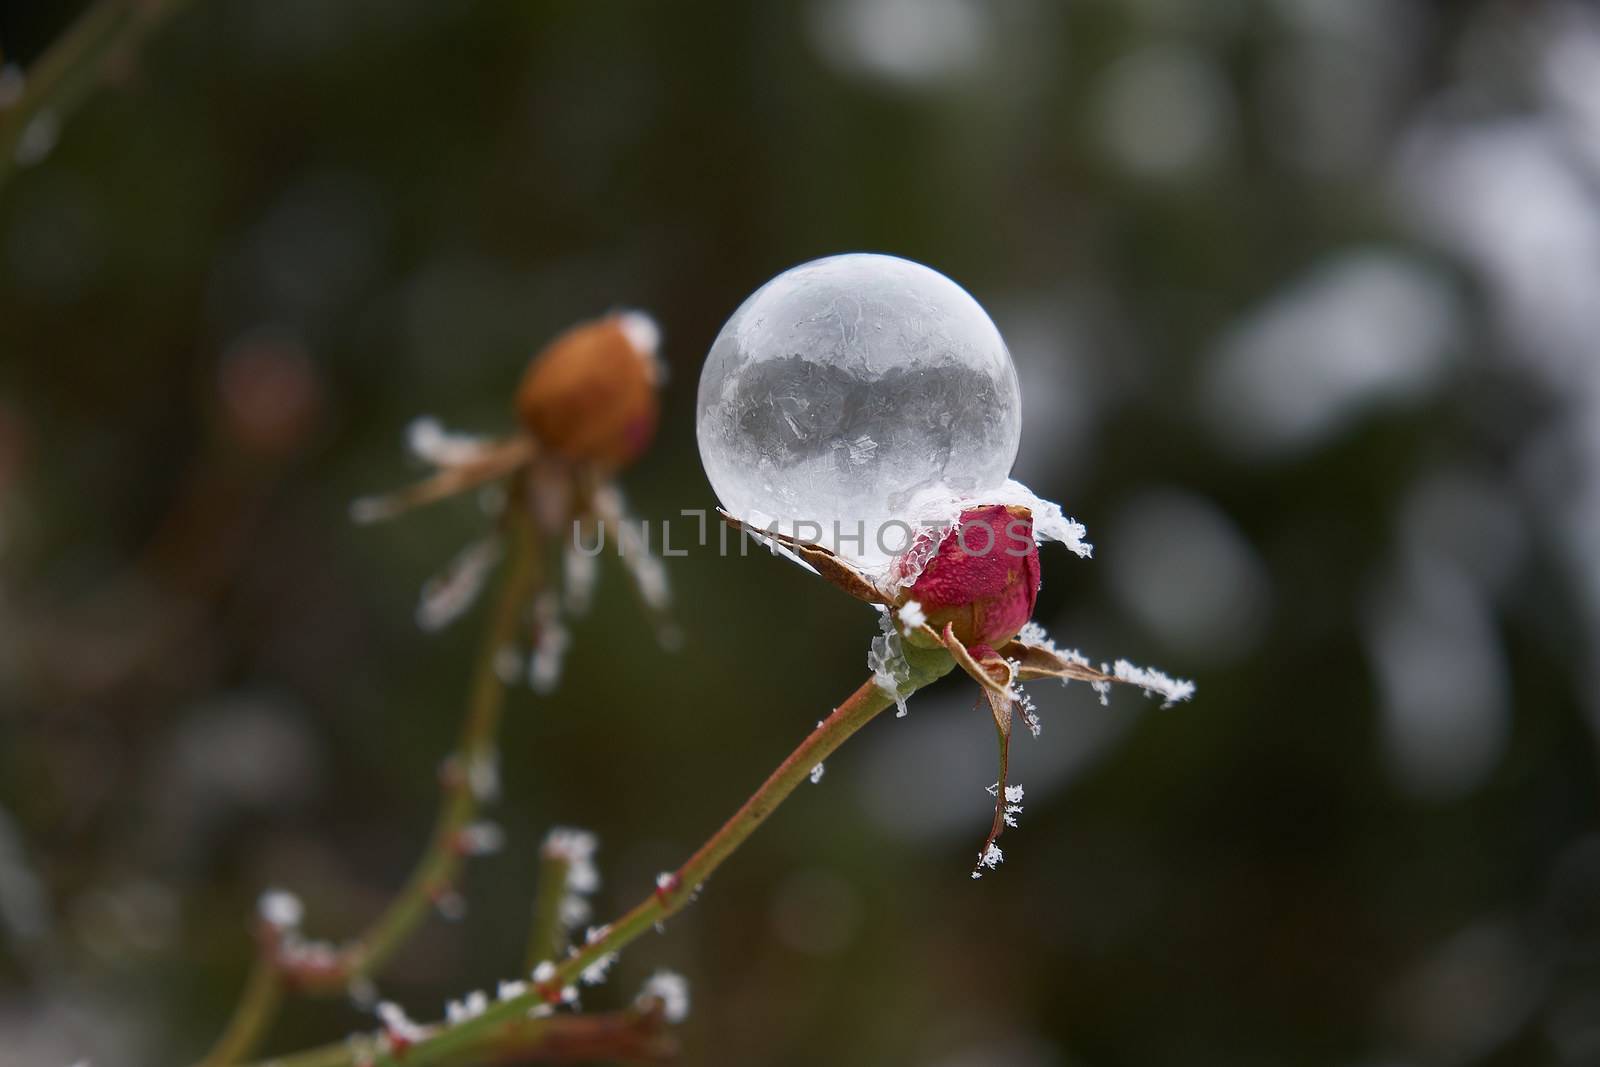 Frozen rose and one soap bubble by Sirius3001